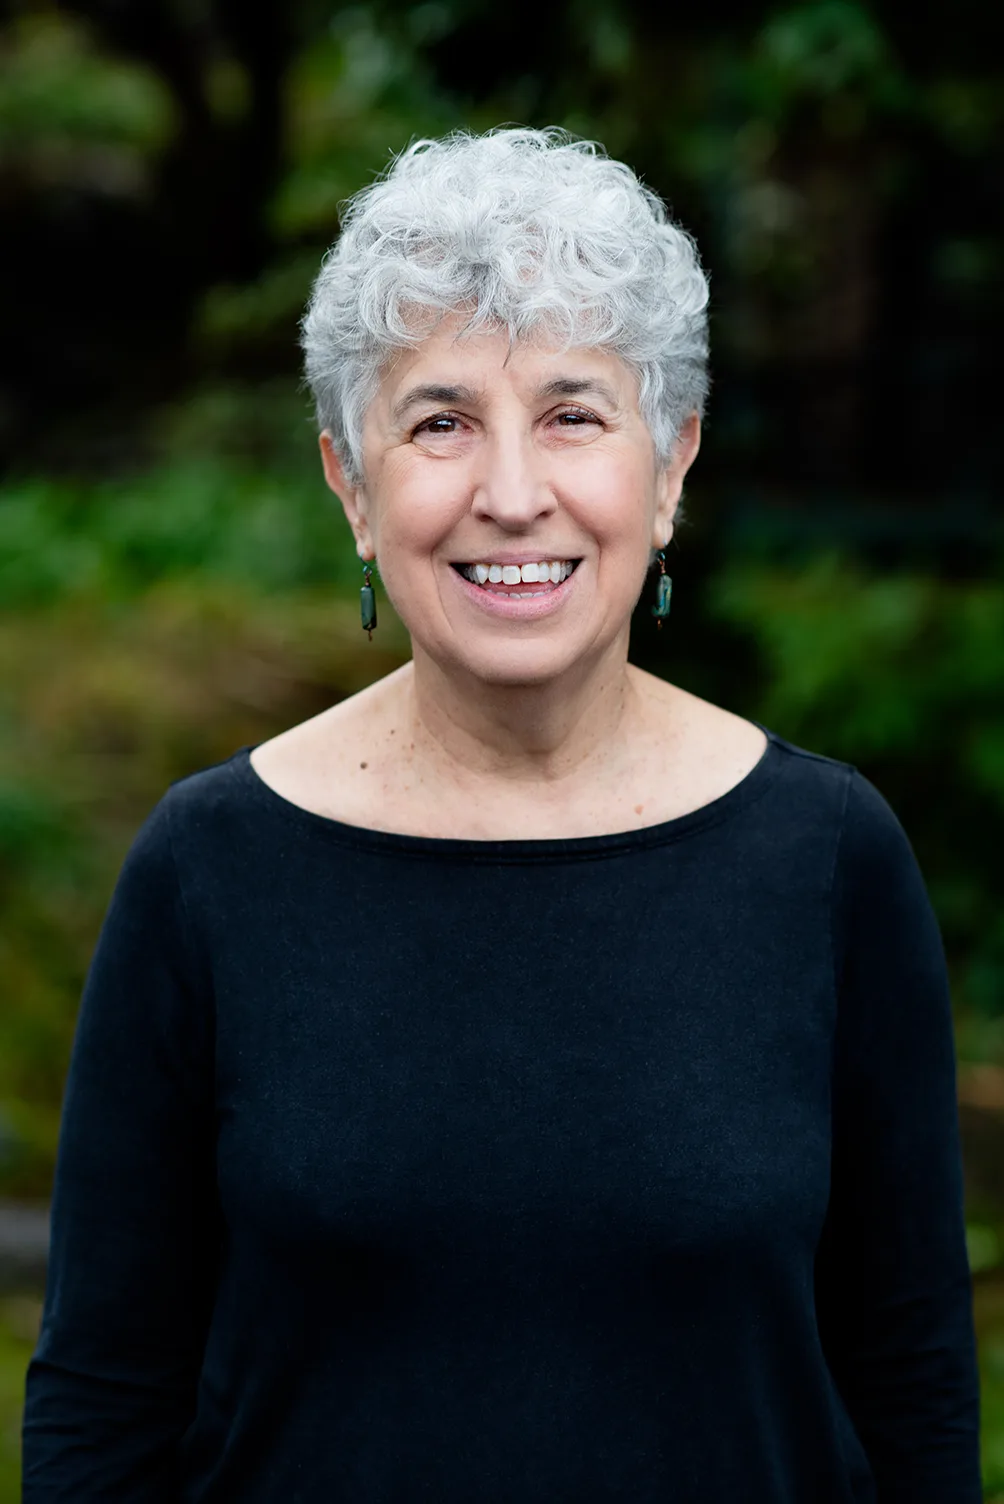 Rhea Tregebov, photo of the author in a black dress, in front of a blurred background of foliage